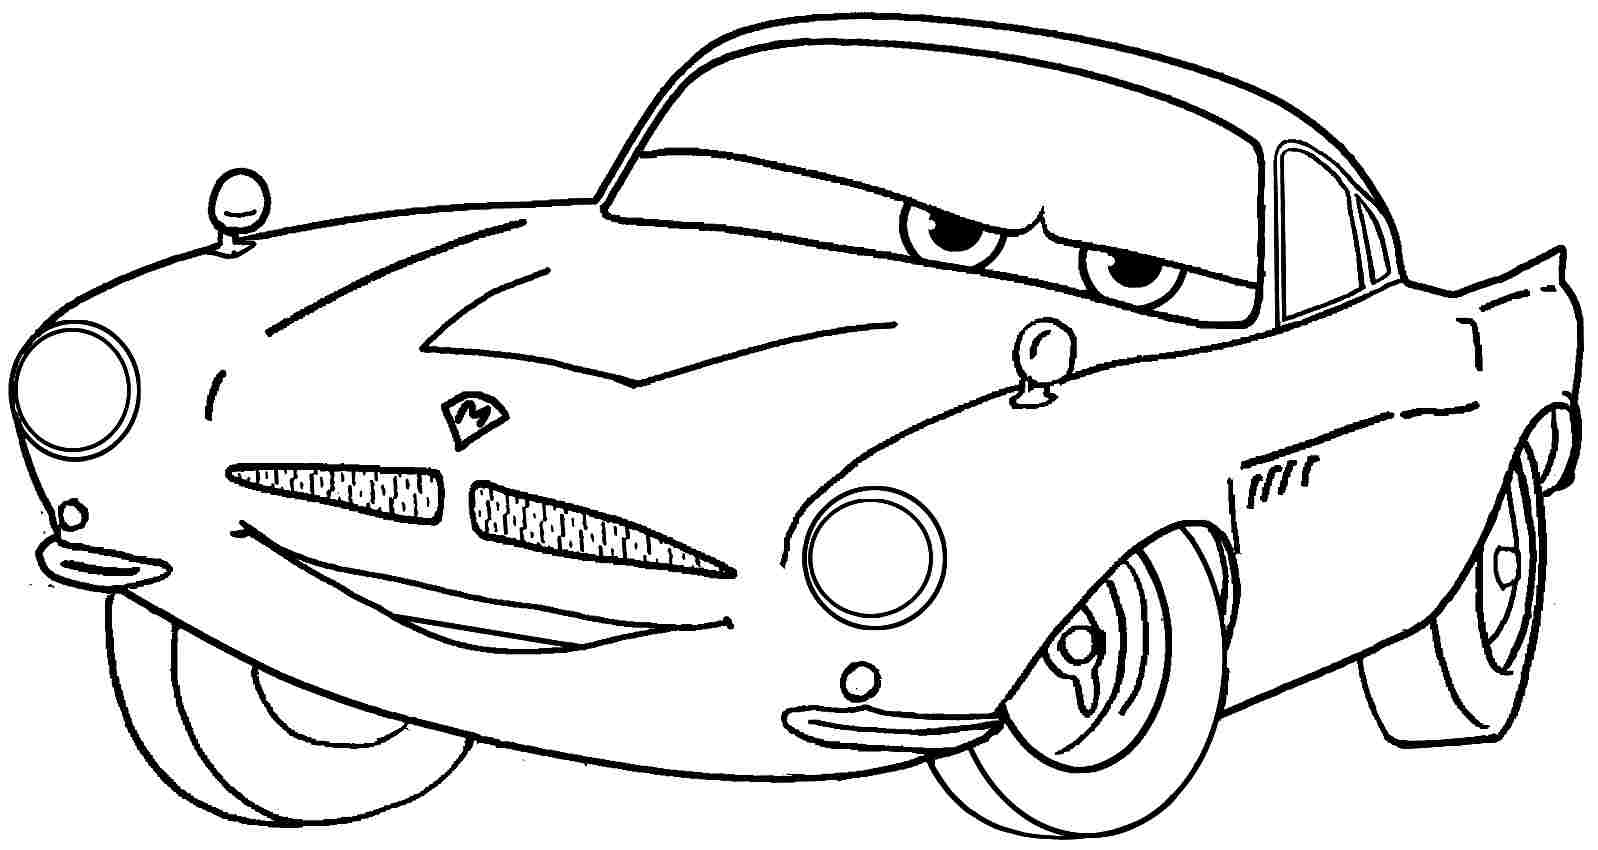 7-best-images-of-free-printable-cars-the-movie-cars-movie-printable